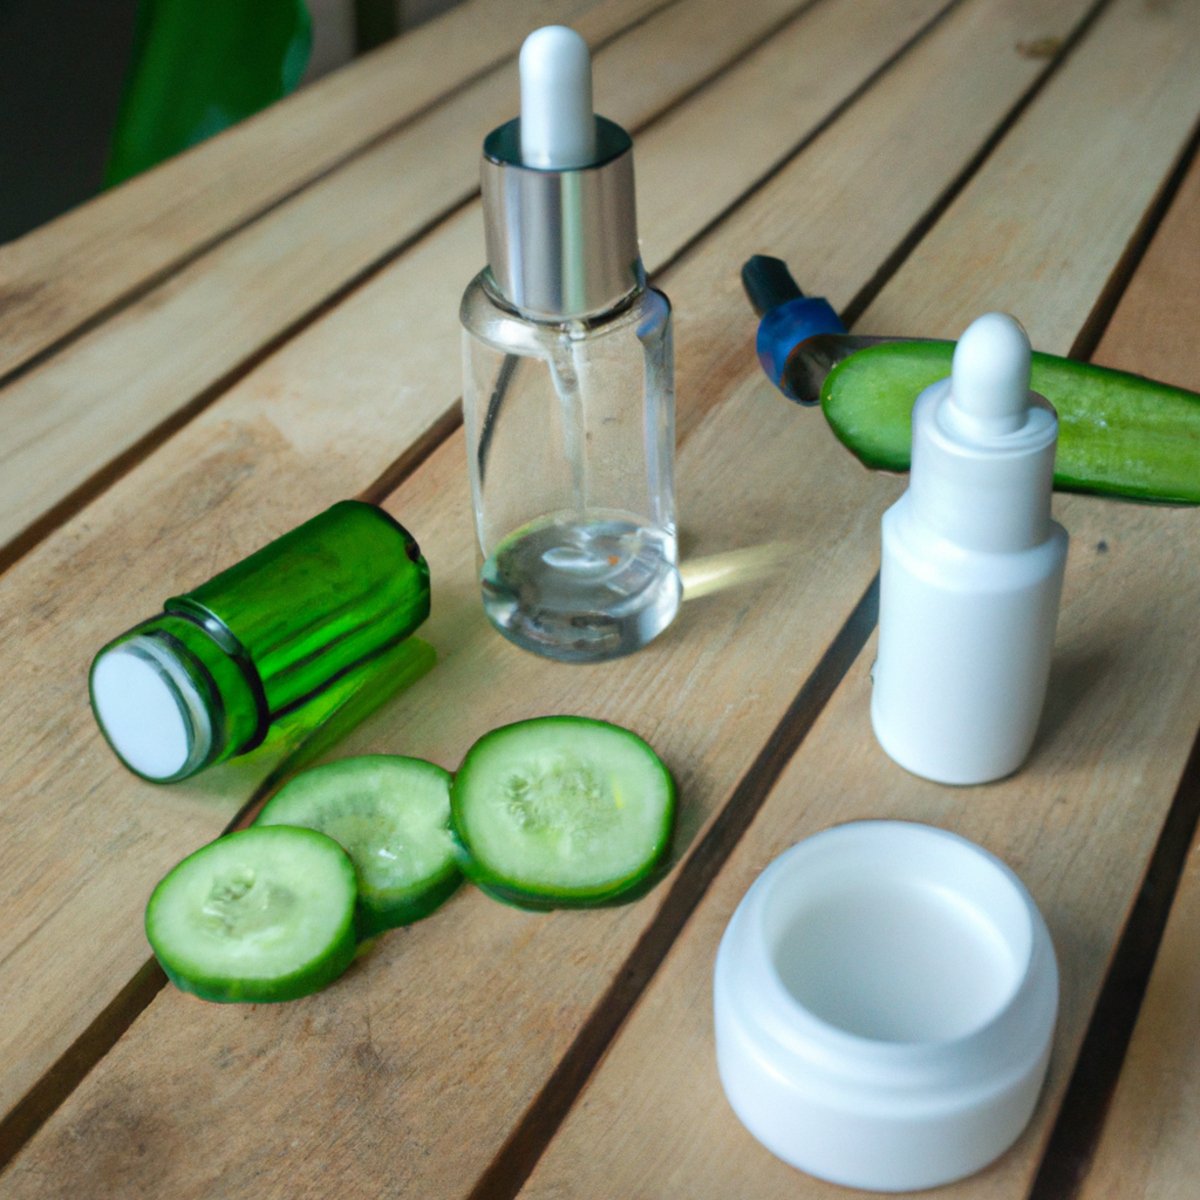 Get ready to glow with these natural skin care routines! From cucumber-infused water to hydrating mists, this table has everything you need for a fresh-faced look. Don't forget the facial oil and moisturizing cream for the ultimate pampering experience. Your skin will thank you!